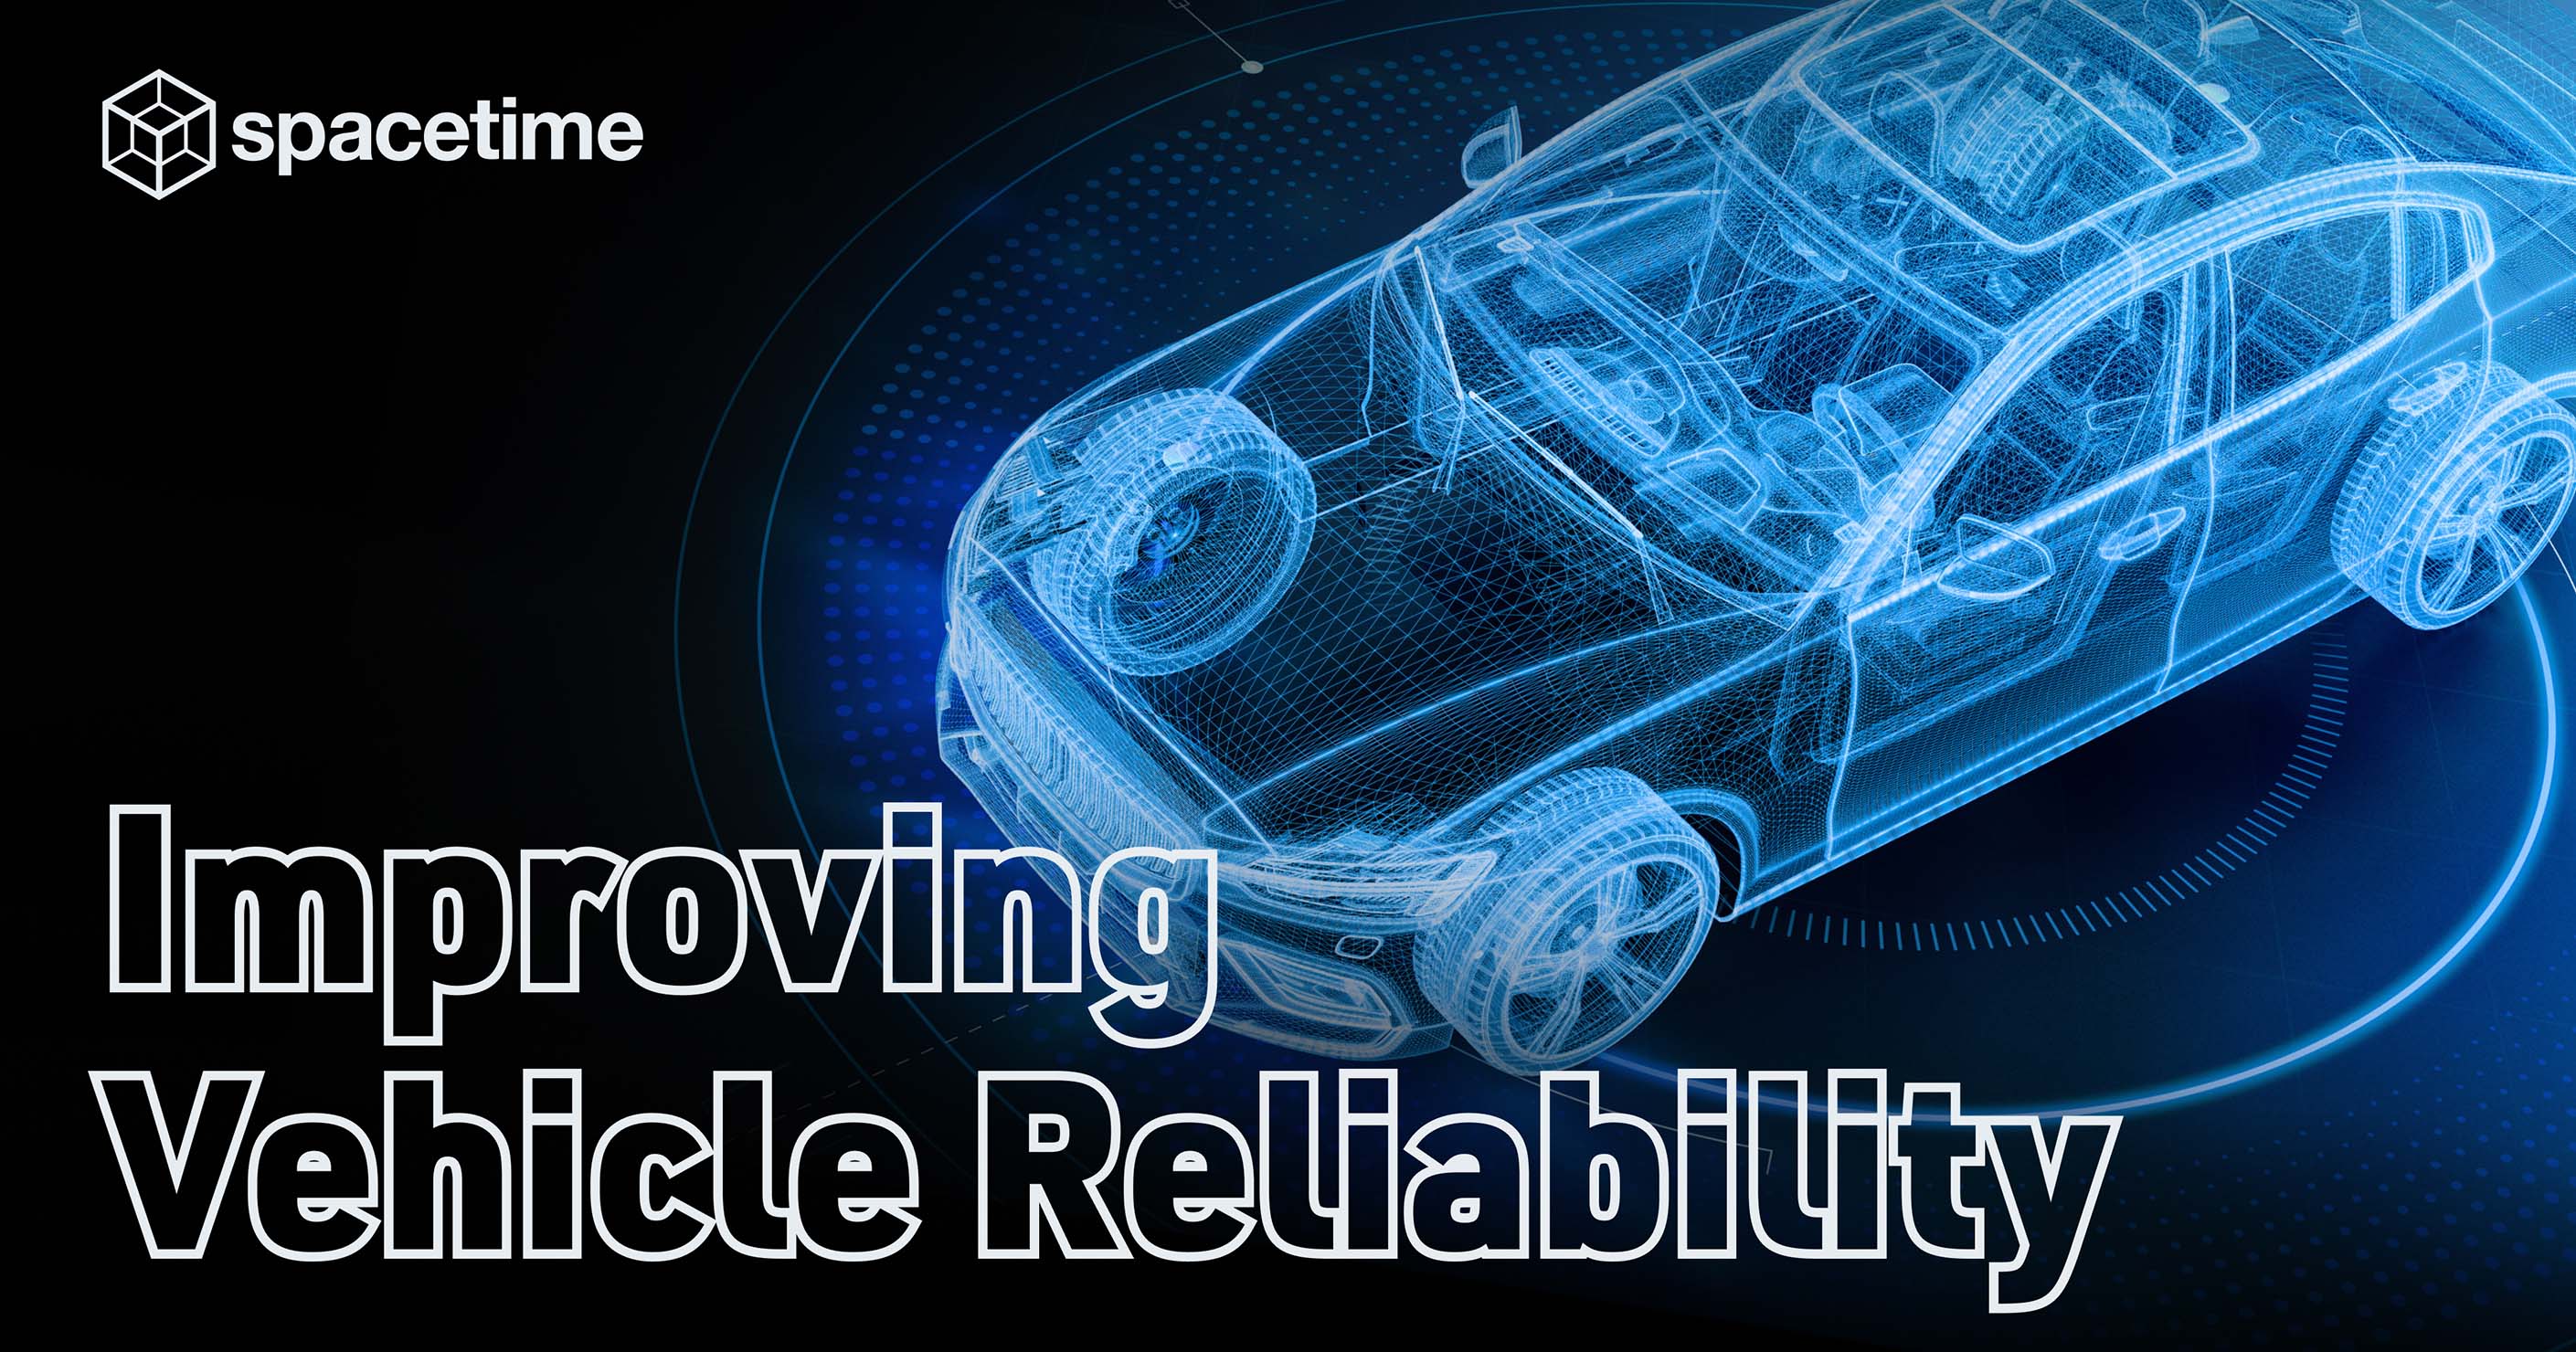 Predictive Modeling: Improving Vehicle Reliability